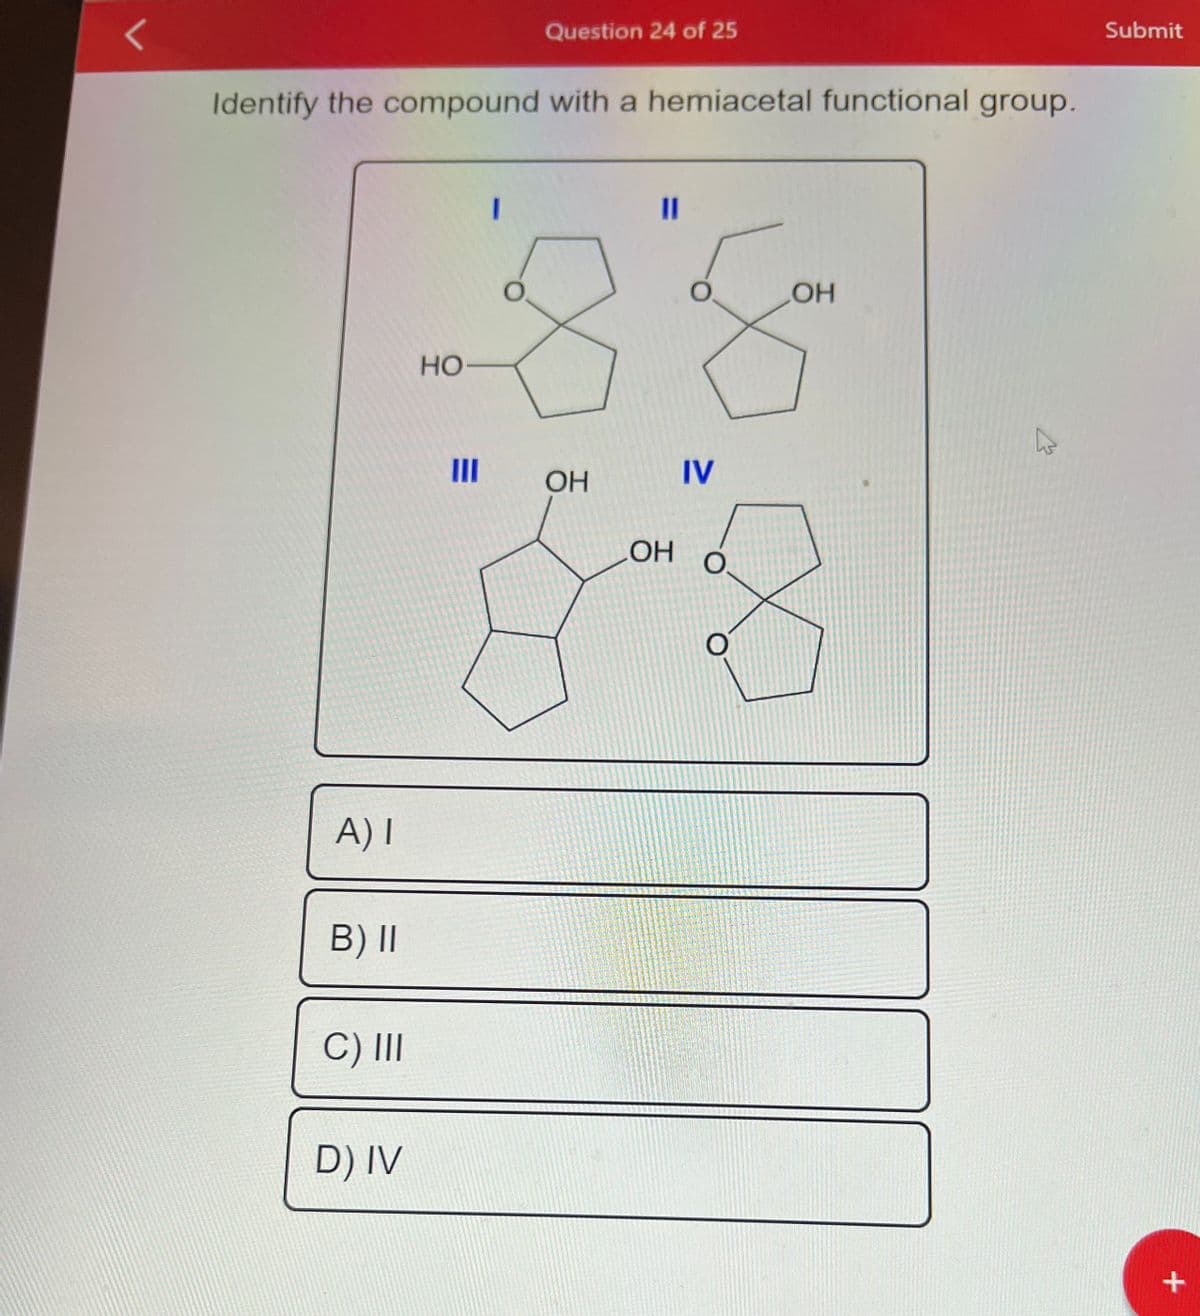 <
Identify the compound with a hemiacetal functional group.
A) I
B) II
C) III
D) IV
Question 24 of 25
HO-
OH
11
OH
O
IV
O
LOH
4
Submit